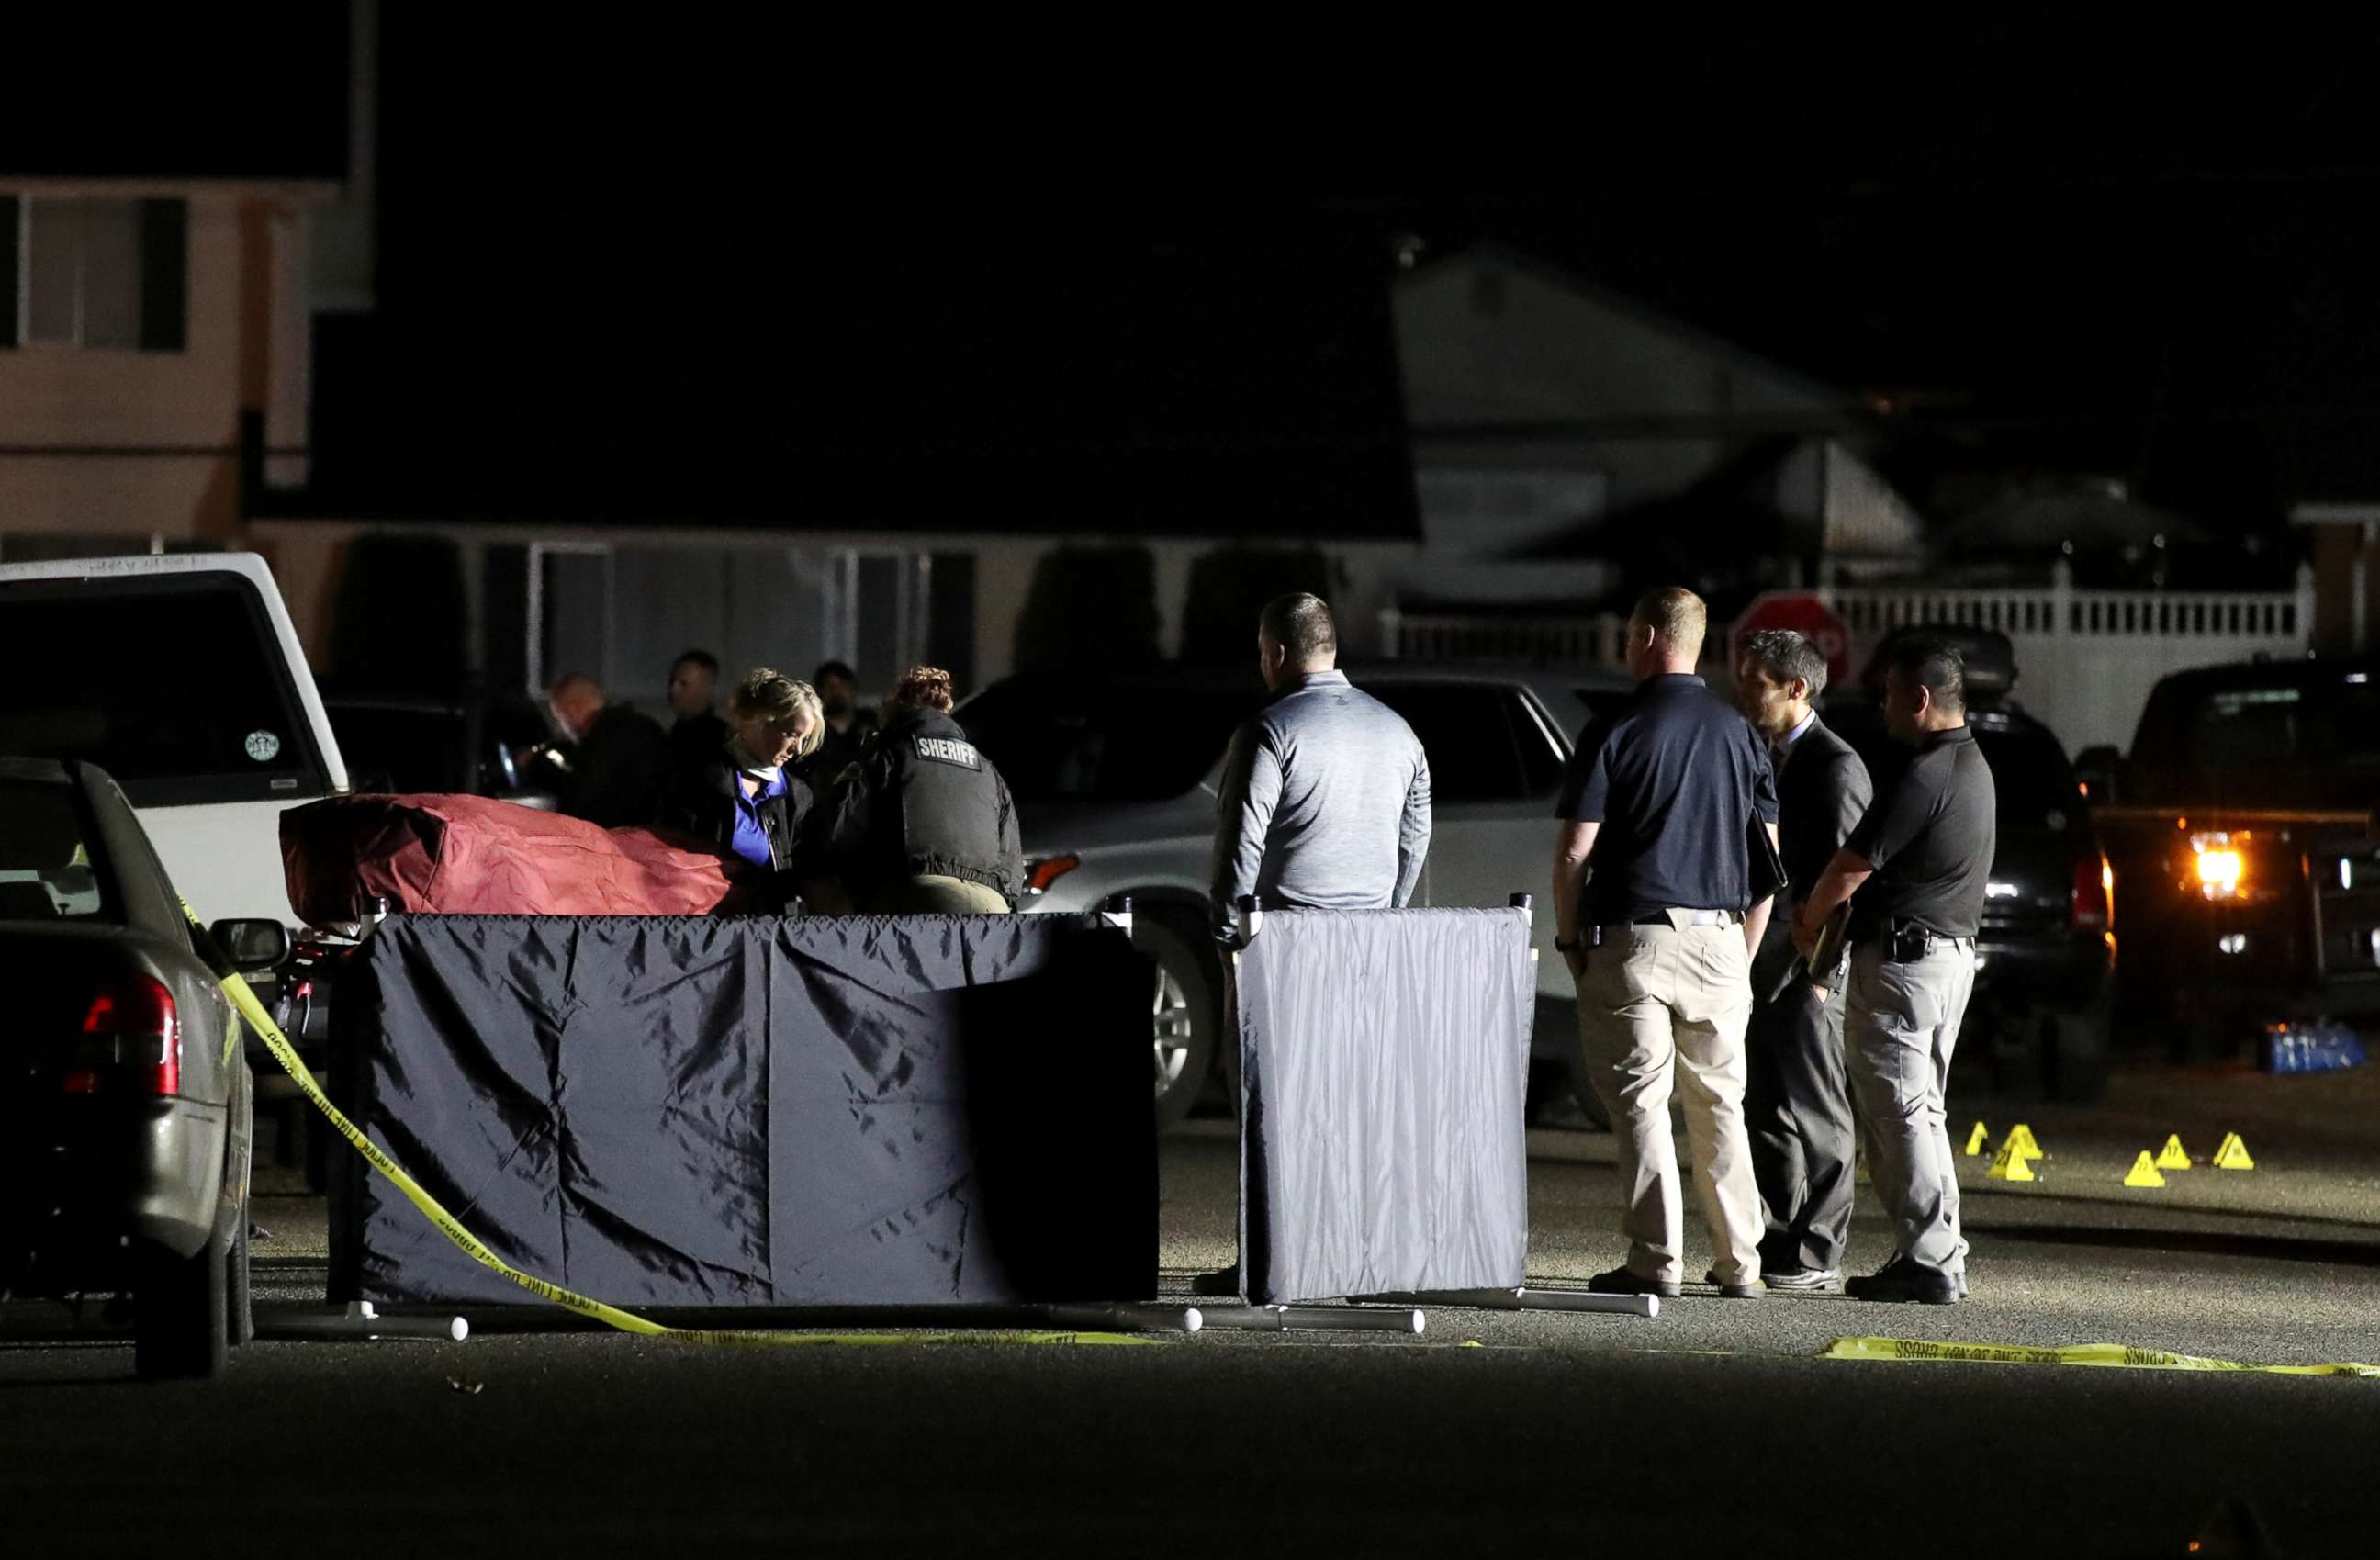 PHOTO: Investigators move the body at Tanglewilde Terrace, where law enforcement officers shot a man reported to be Michael Forest Reinoehl, in Lacey, Washington, Sept. 4, 2020.